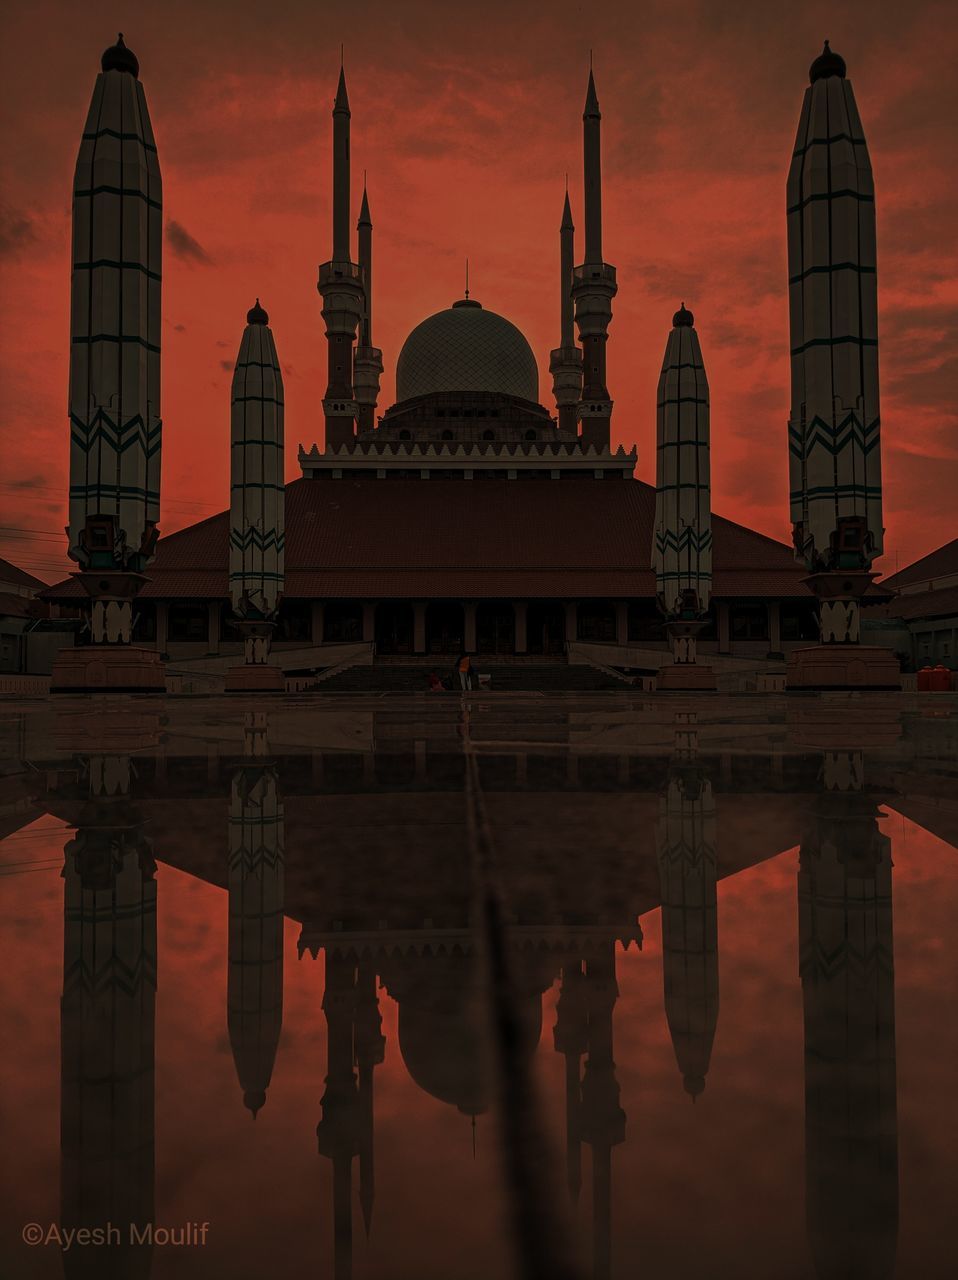 architecture, reflection, place of worship, religion, evening, built structure, travel destinations, sunset, sky, water, travel, building exterior, dome, dusk, belief, landmark, nature, city, temple, spirituality, night, tourism, twilight, building, cloud, history, outdoors, the past, praying